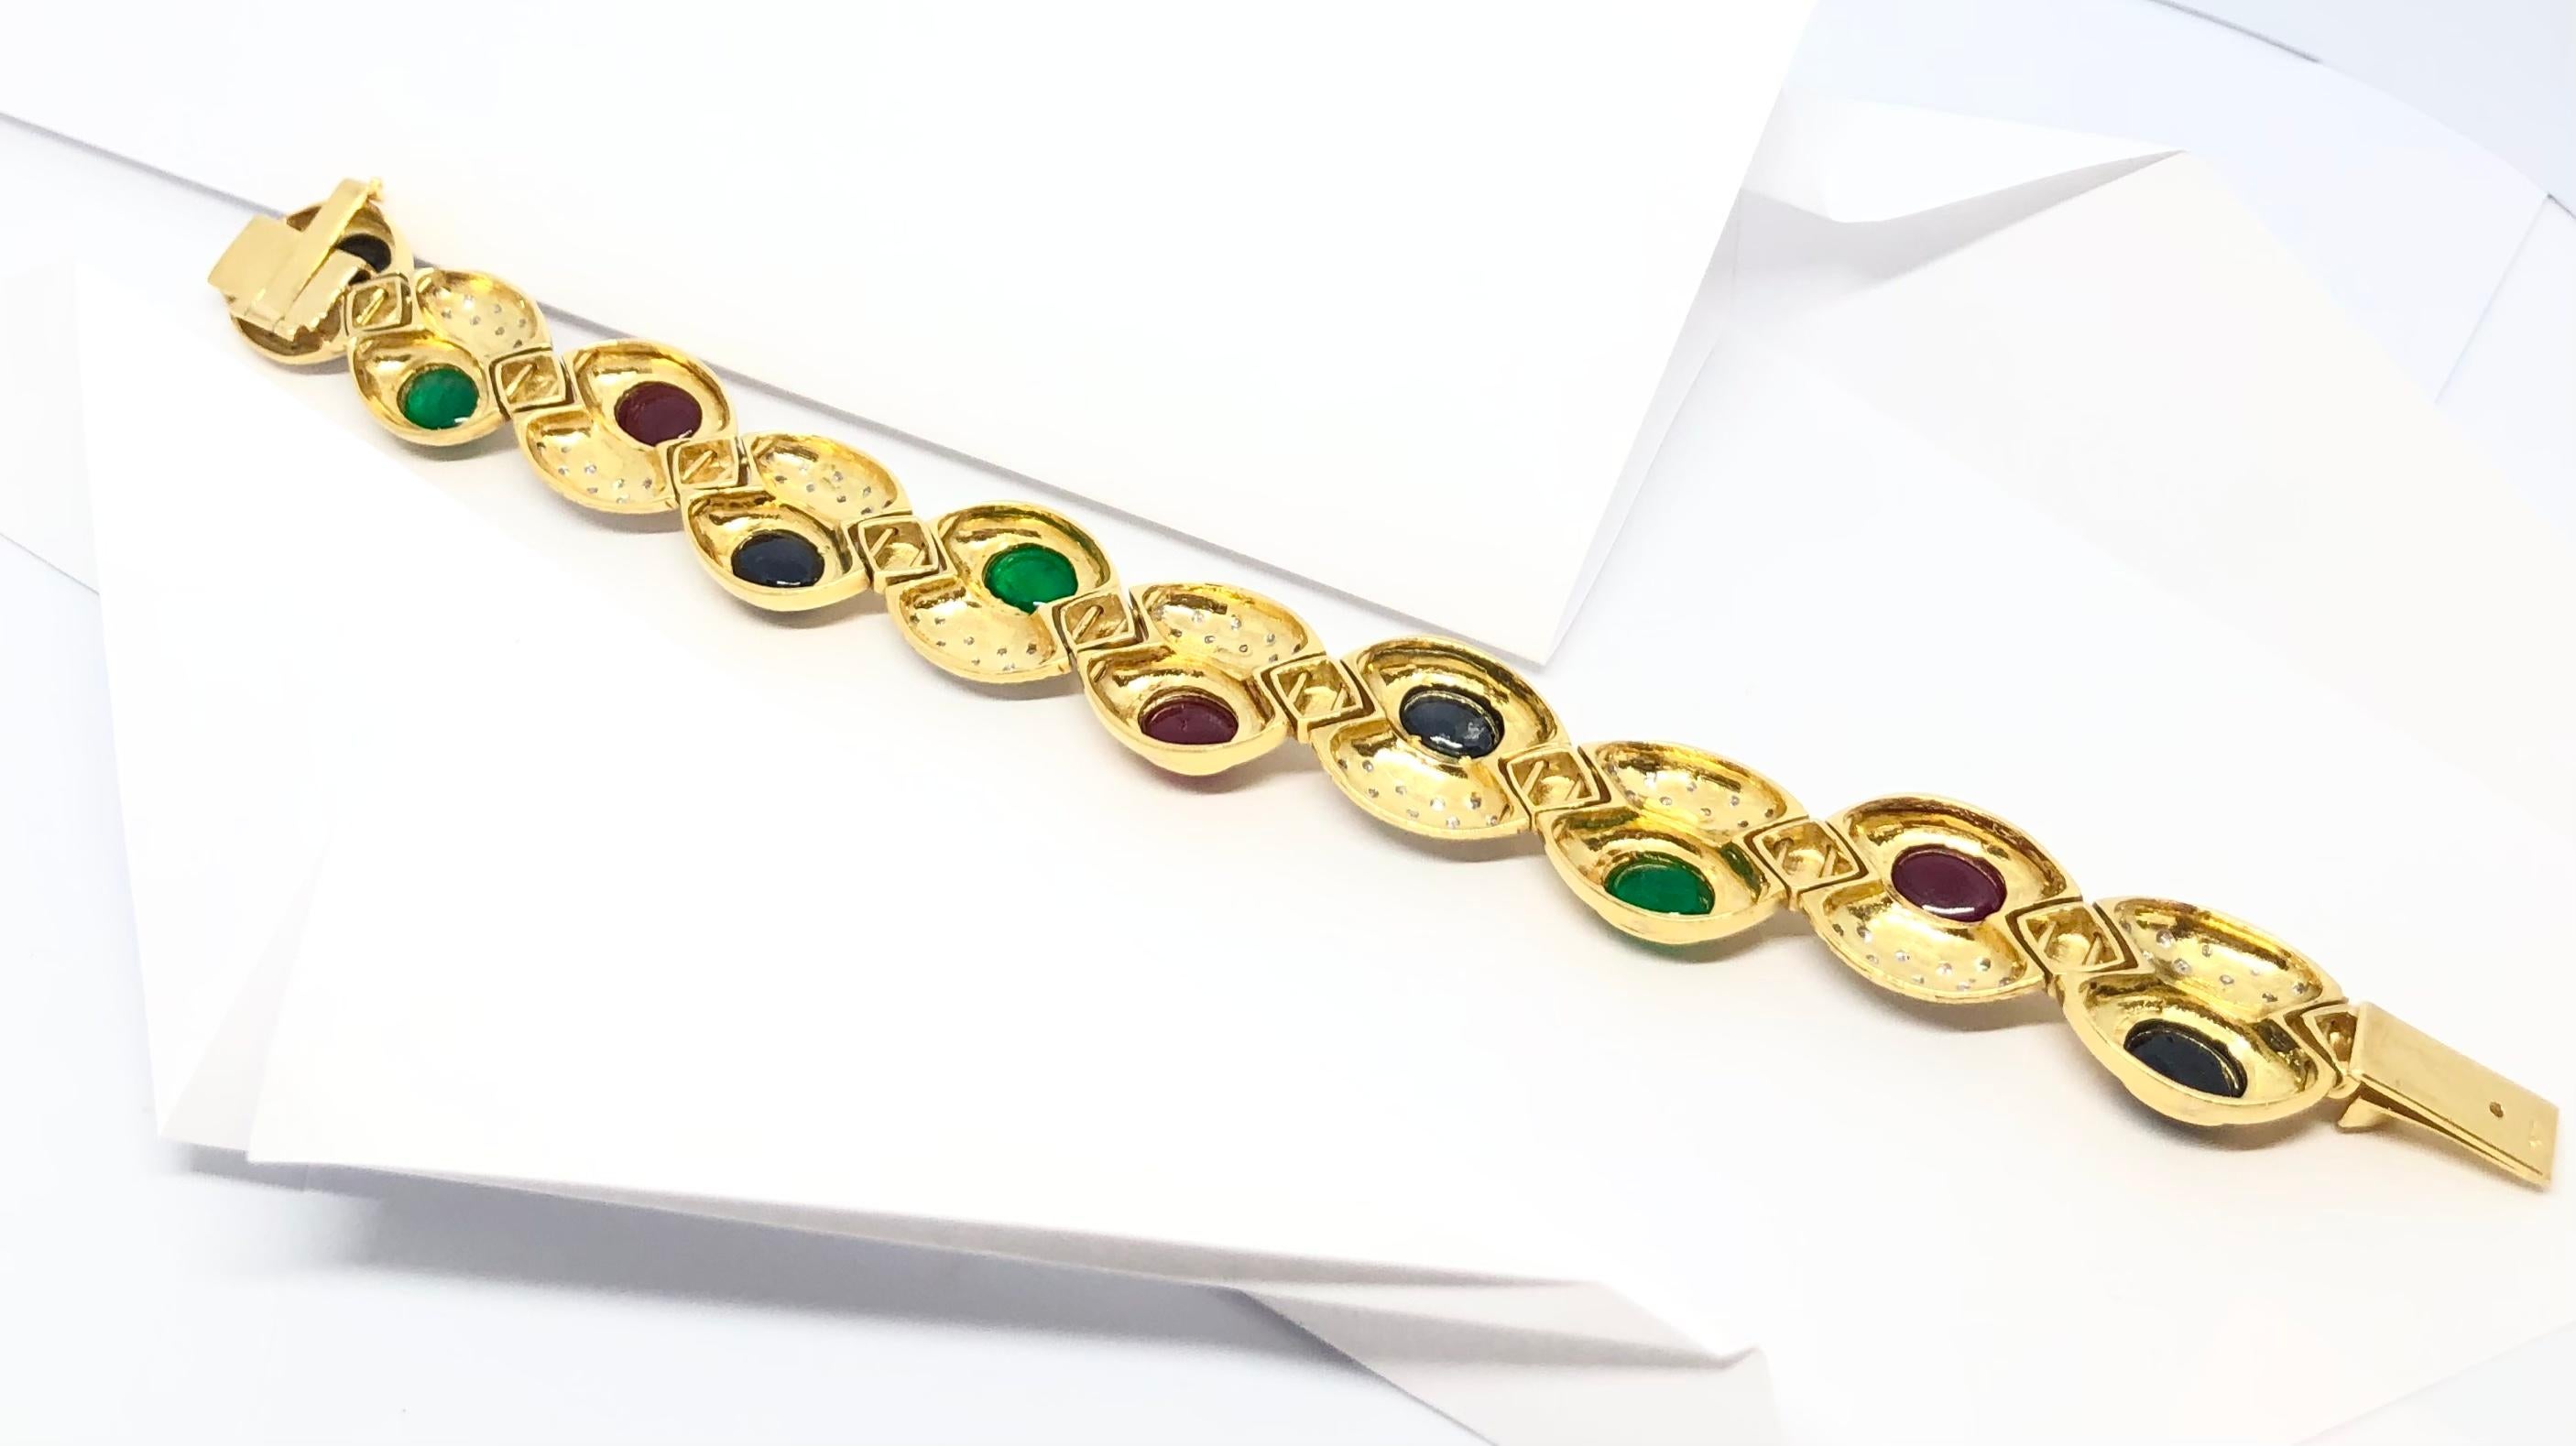 Cabochon Ruby, Emerald, Blue Sapphire with Diamond Bracelet in 18 Karat Gold For Sale 3